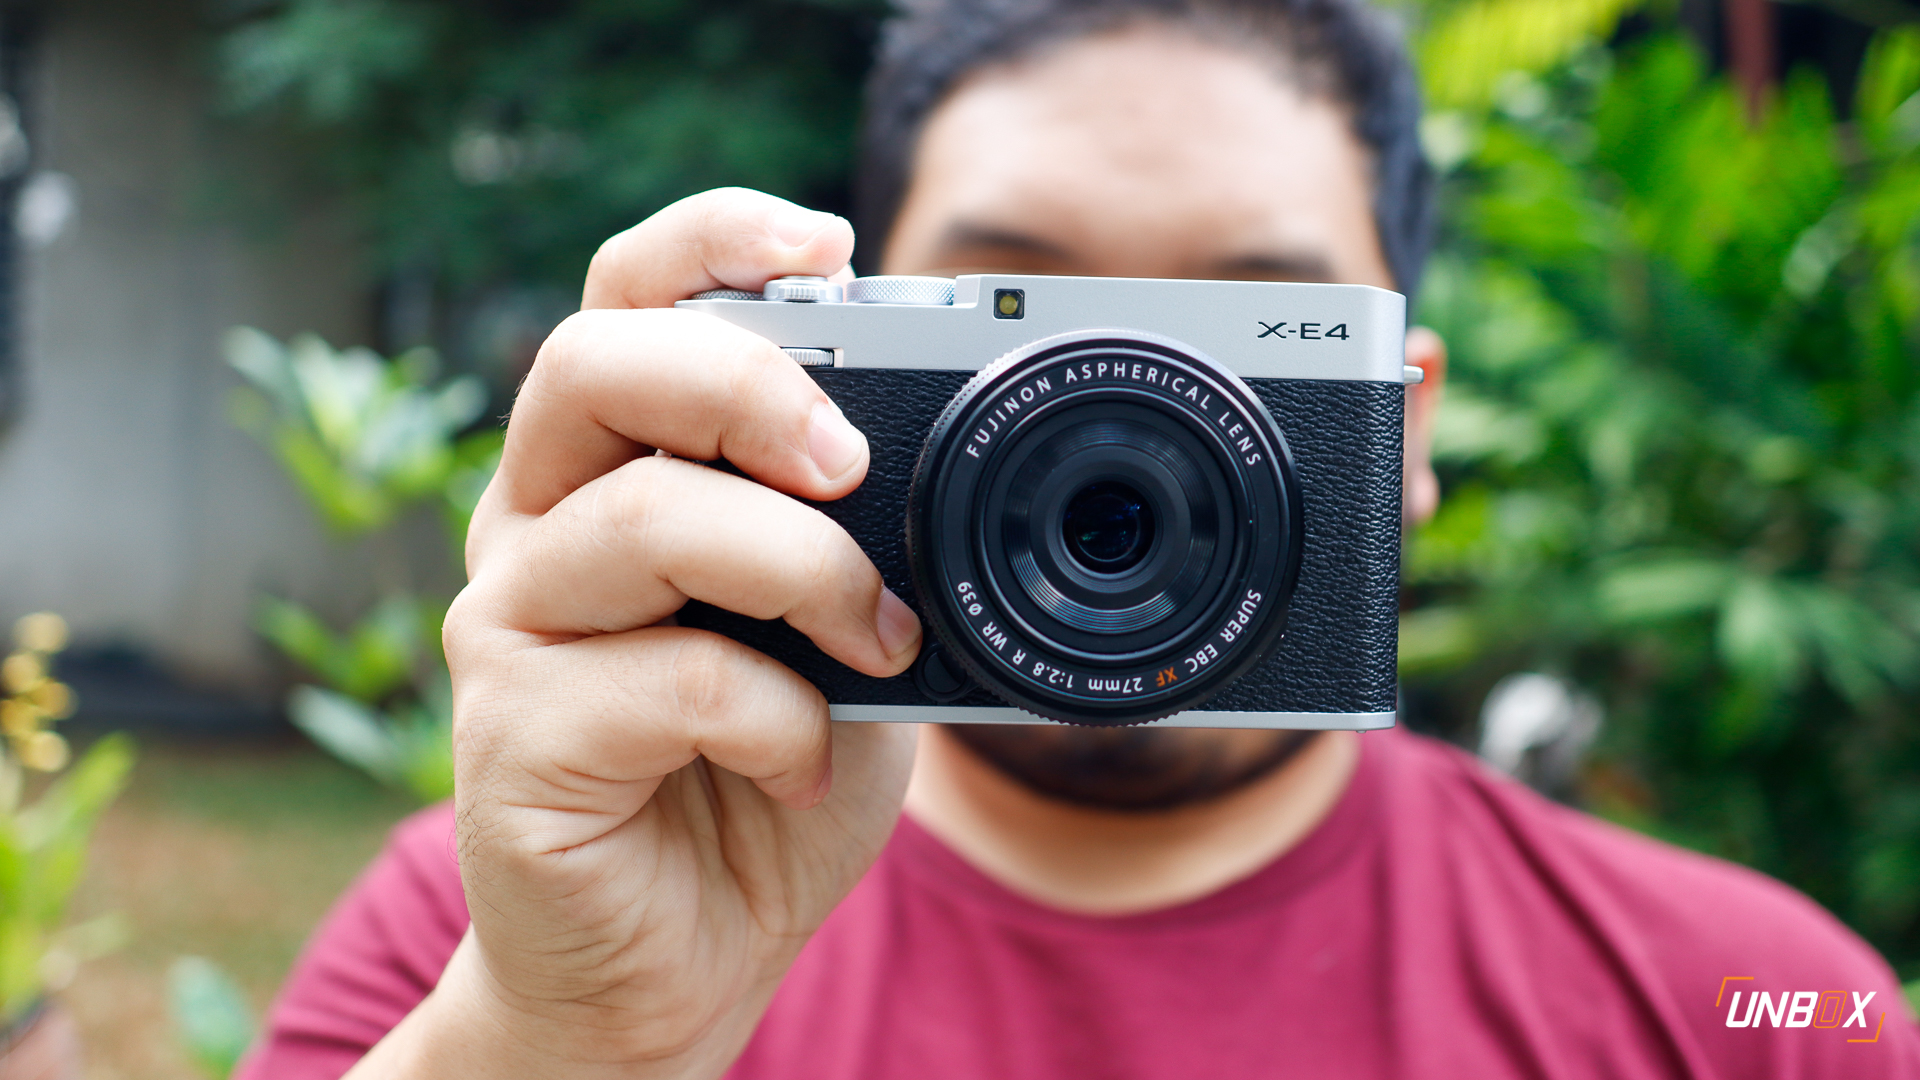 Fujifilm X-E4 Philippines: 5 Things To Love About this Camera